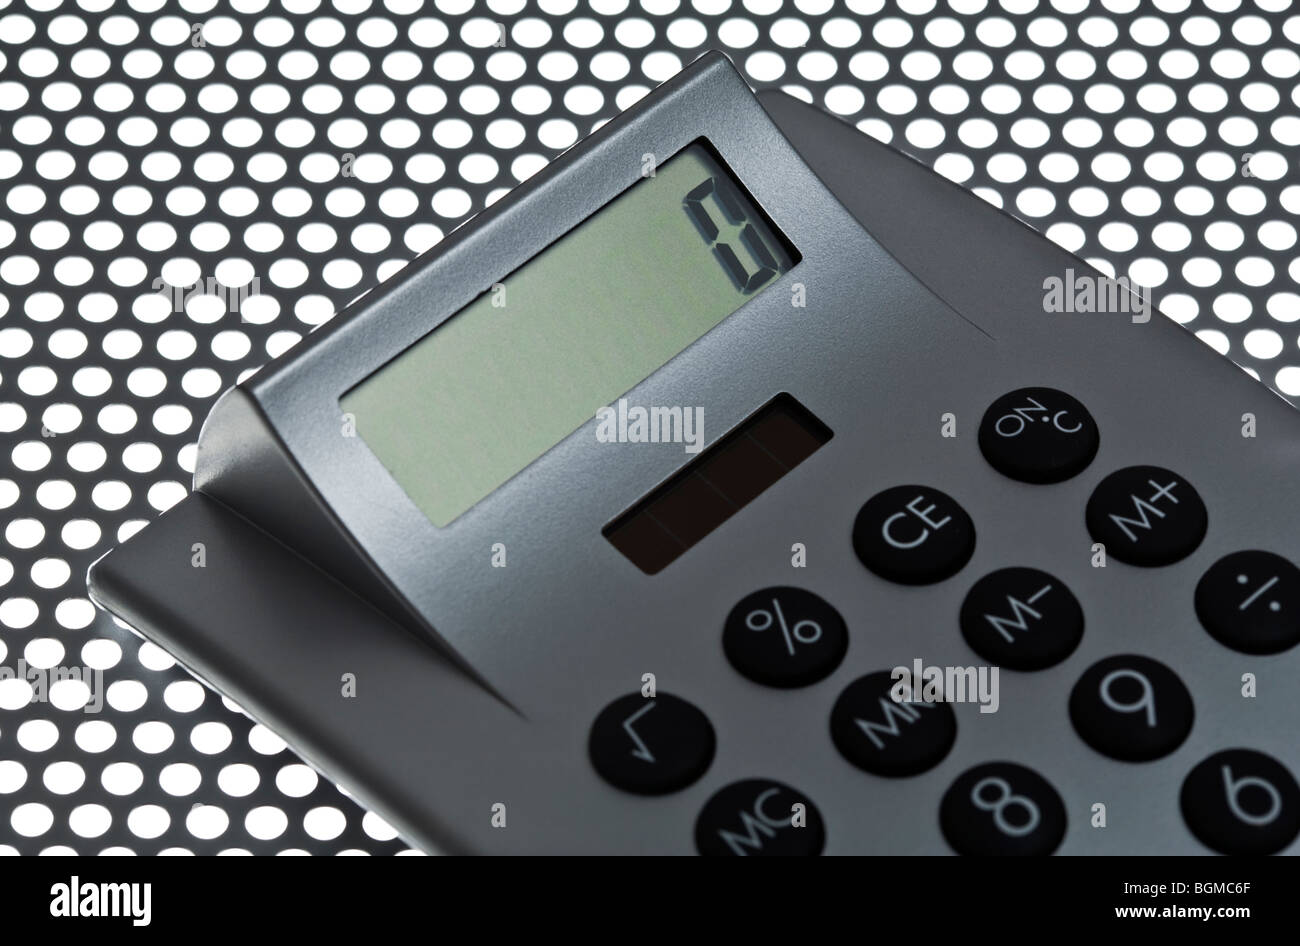 electronic calculator detail on perforated sheet metal Stock Photo